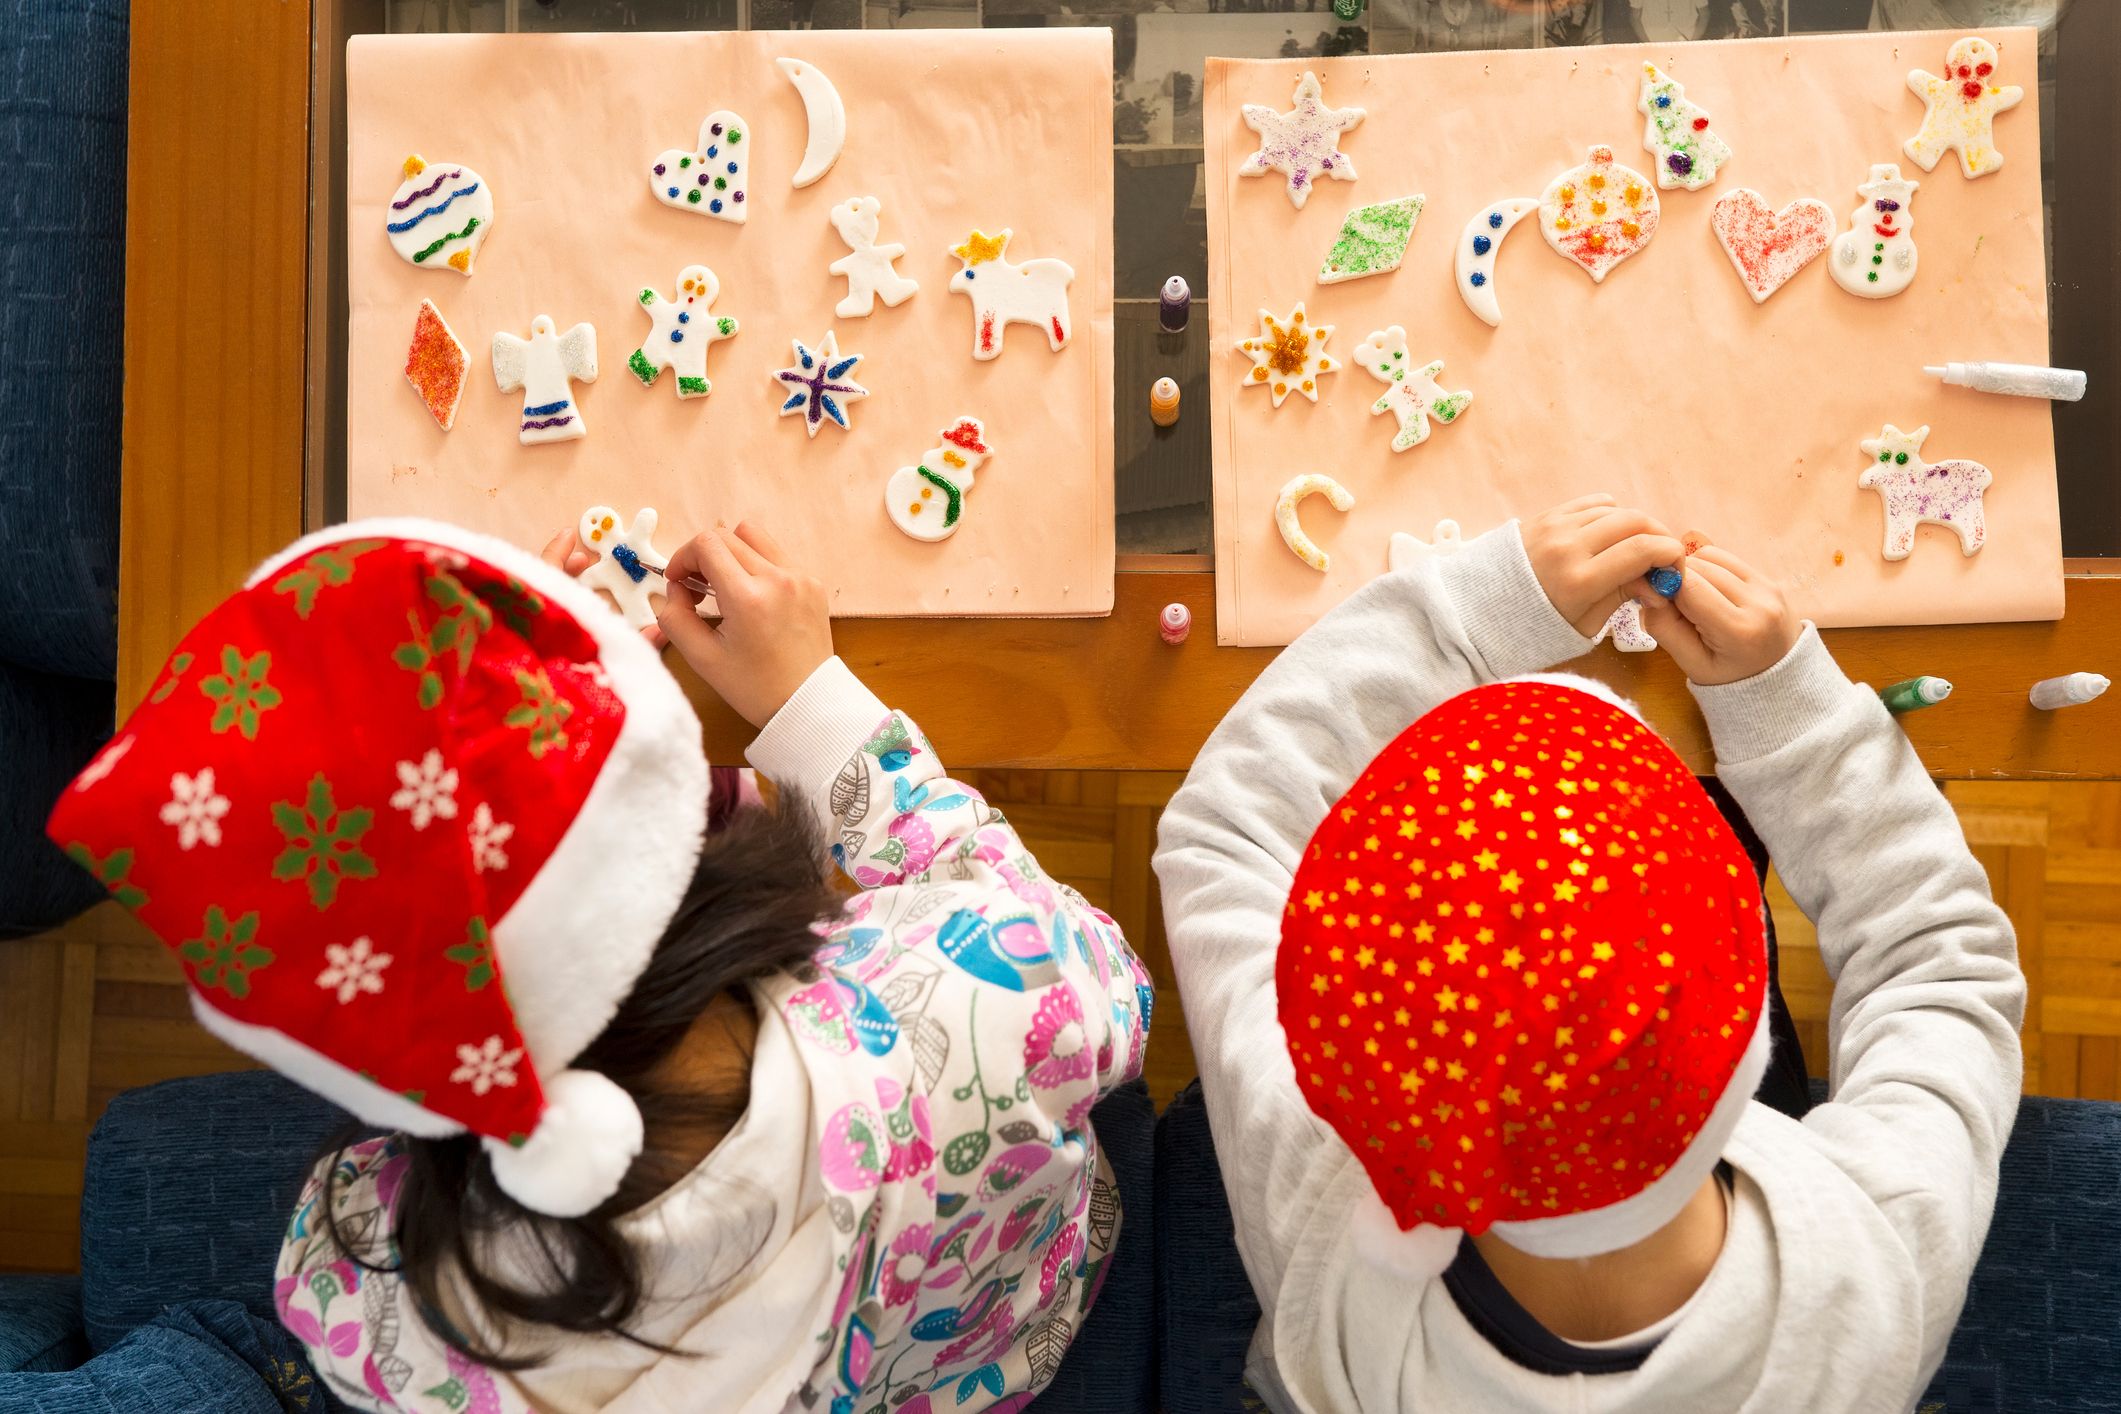 Easy Christmas craft ideas for young children